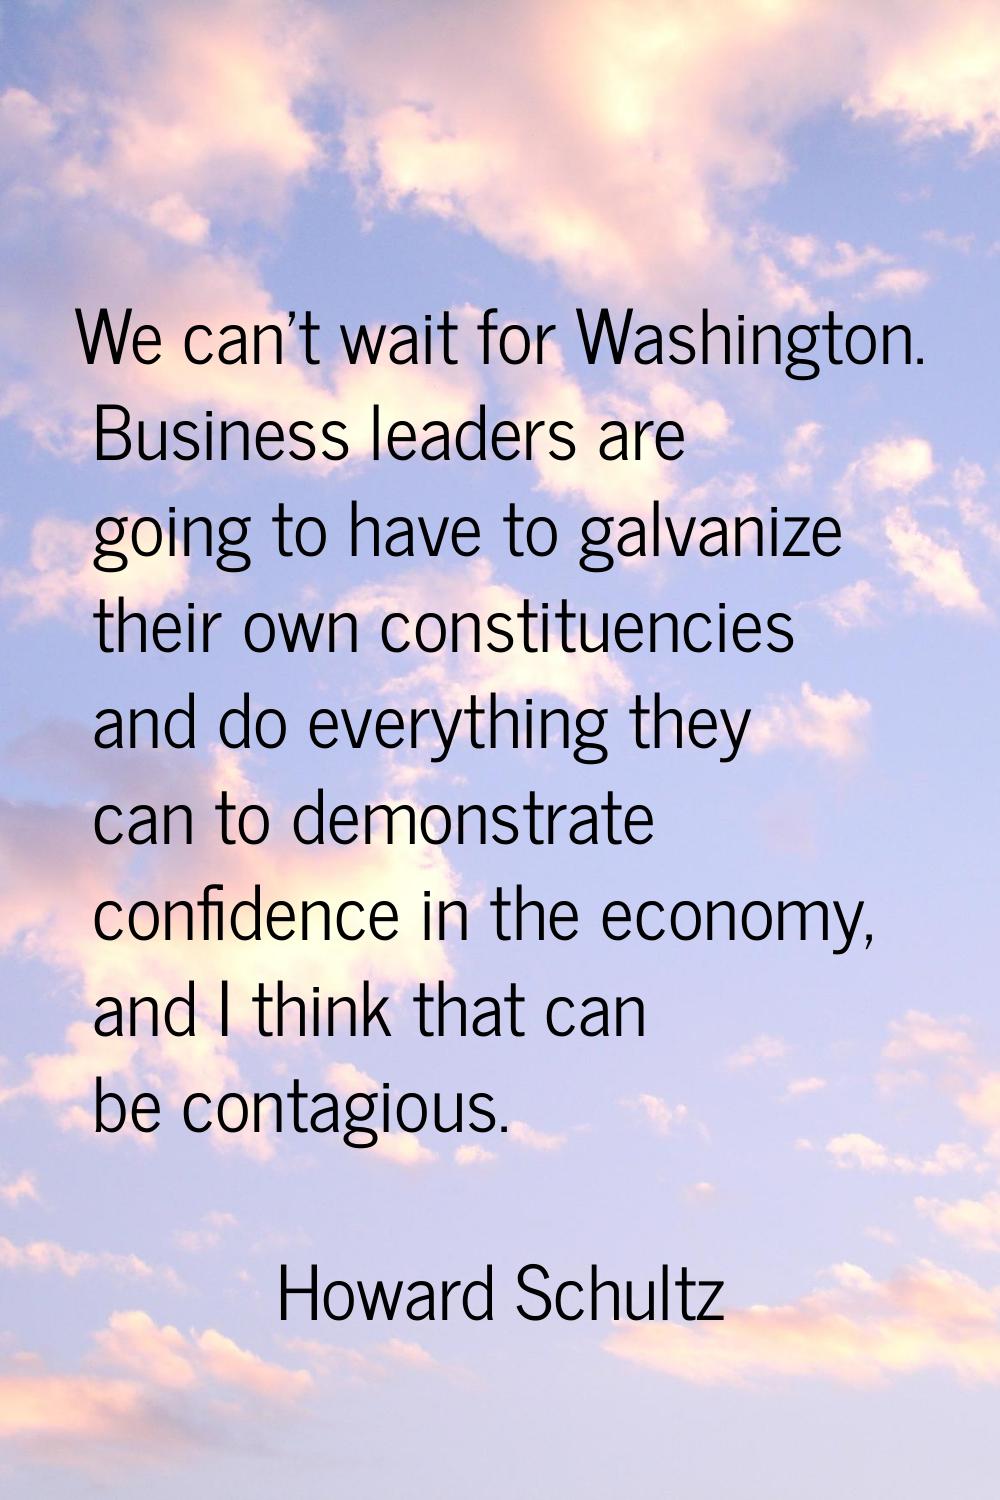 We can't wait for Washington. Business leaders are going to have to galvanize their own constituenc